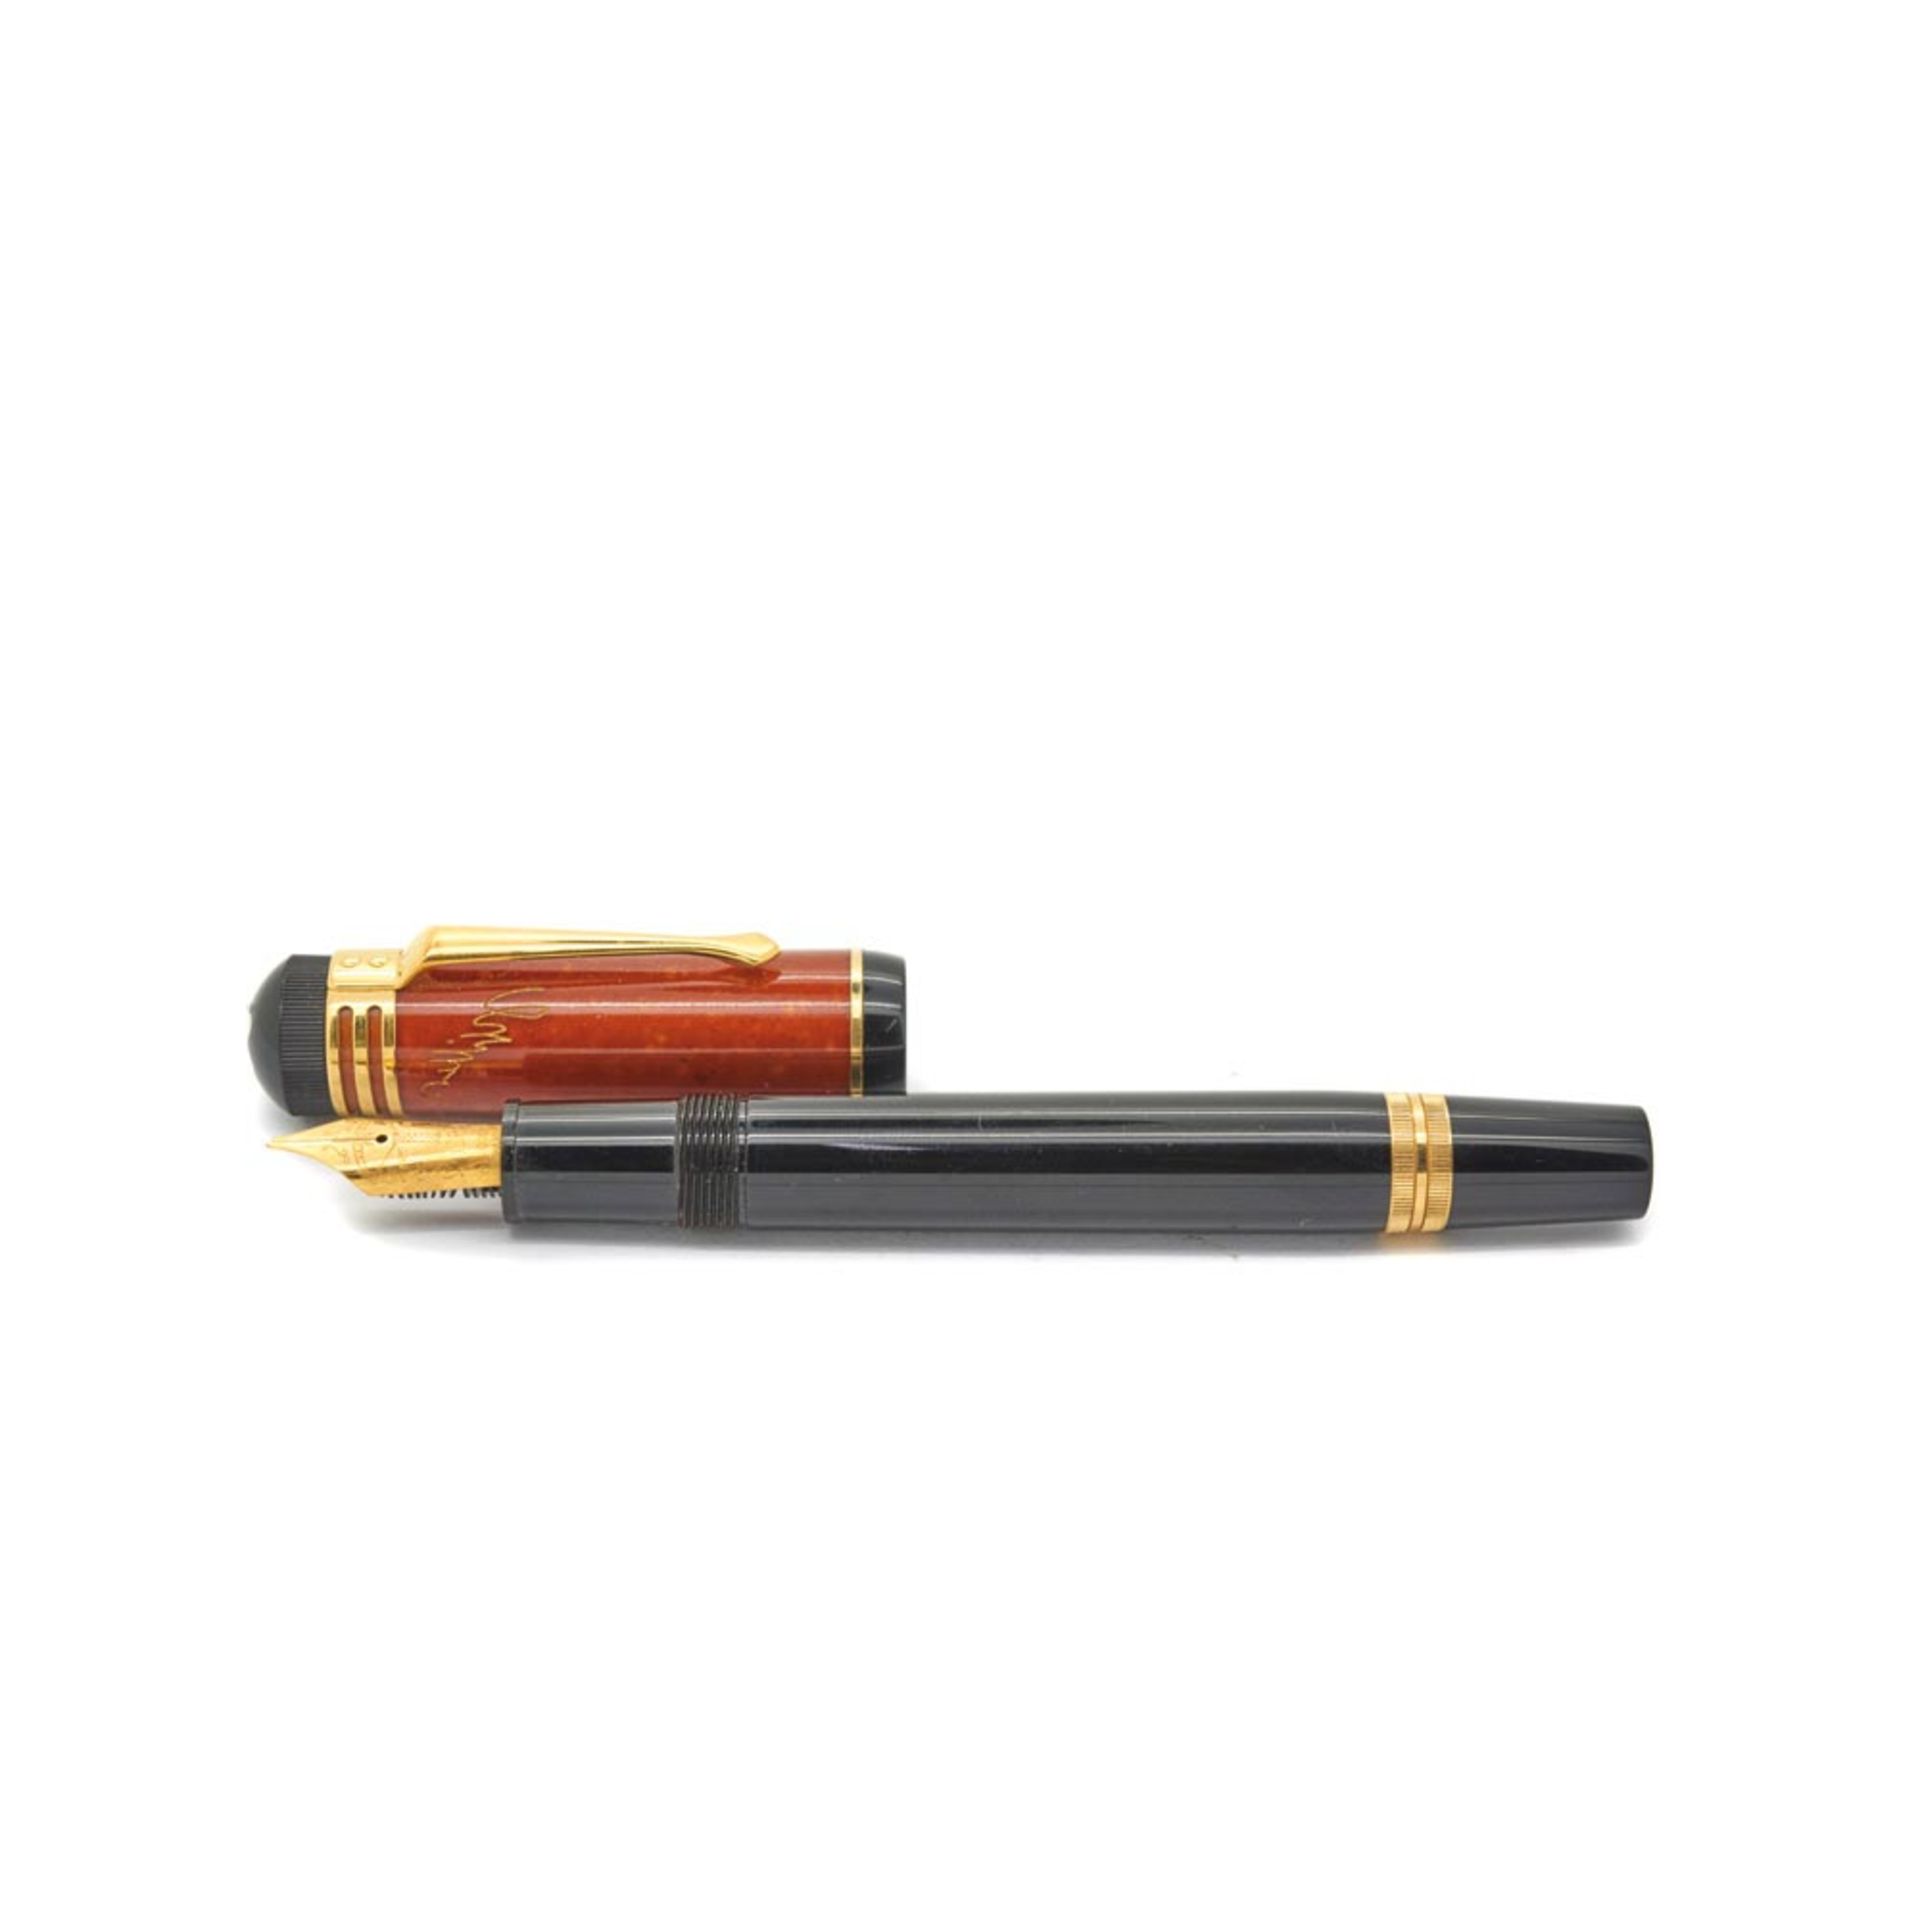 Montblanc "Fiedrich Schiller" black acetate, amber and gold plated fountain pen